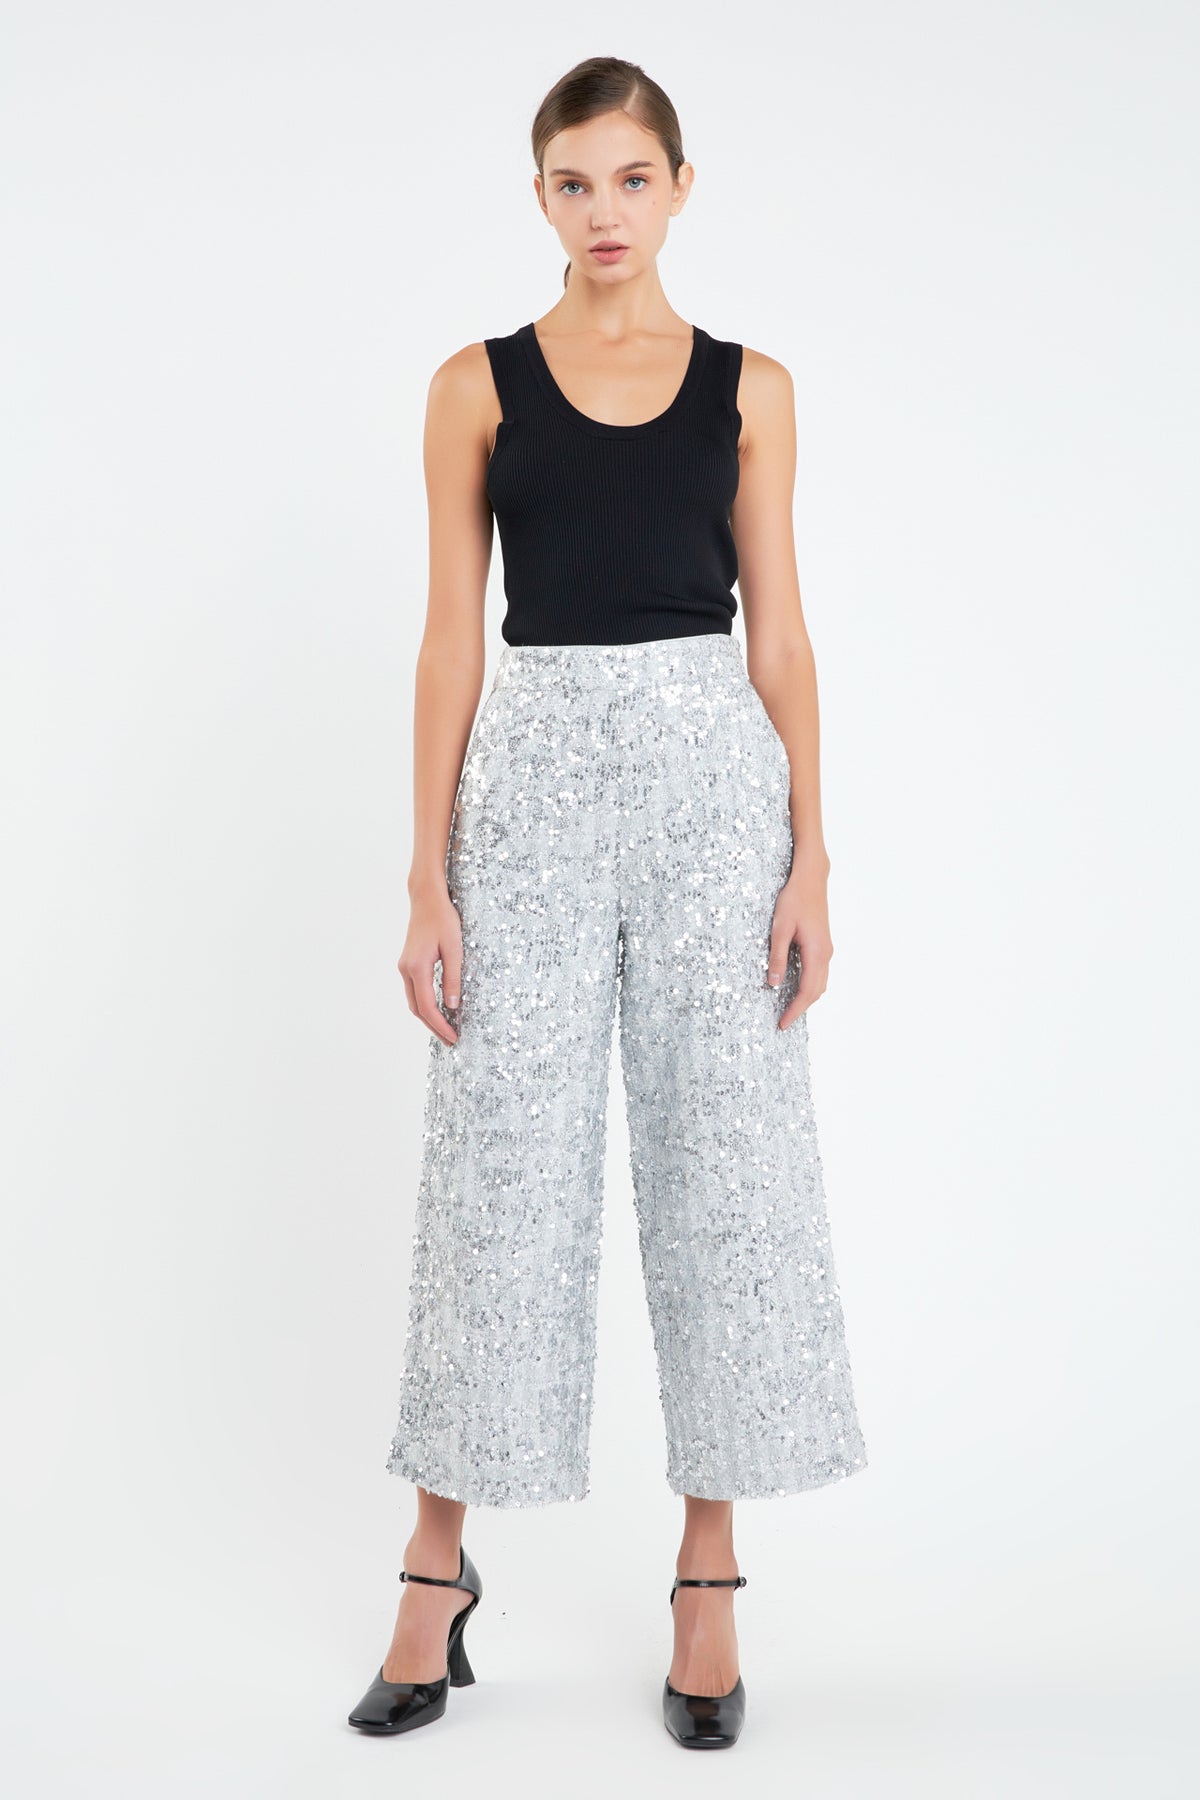 ENGLISH FACTORY - Sequin Tweed Culotte Pants - PANTS available at Objectrare